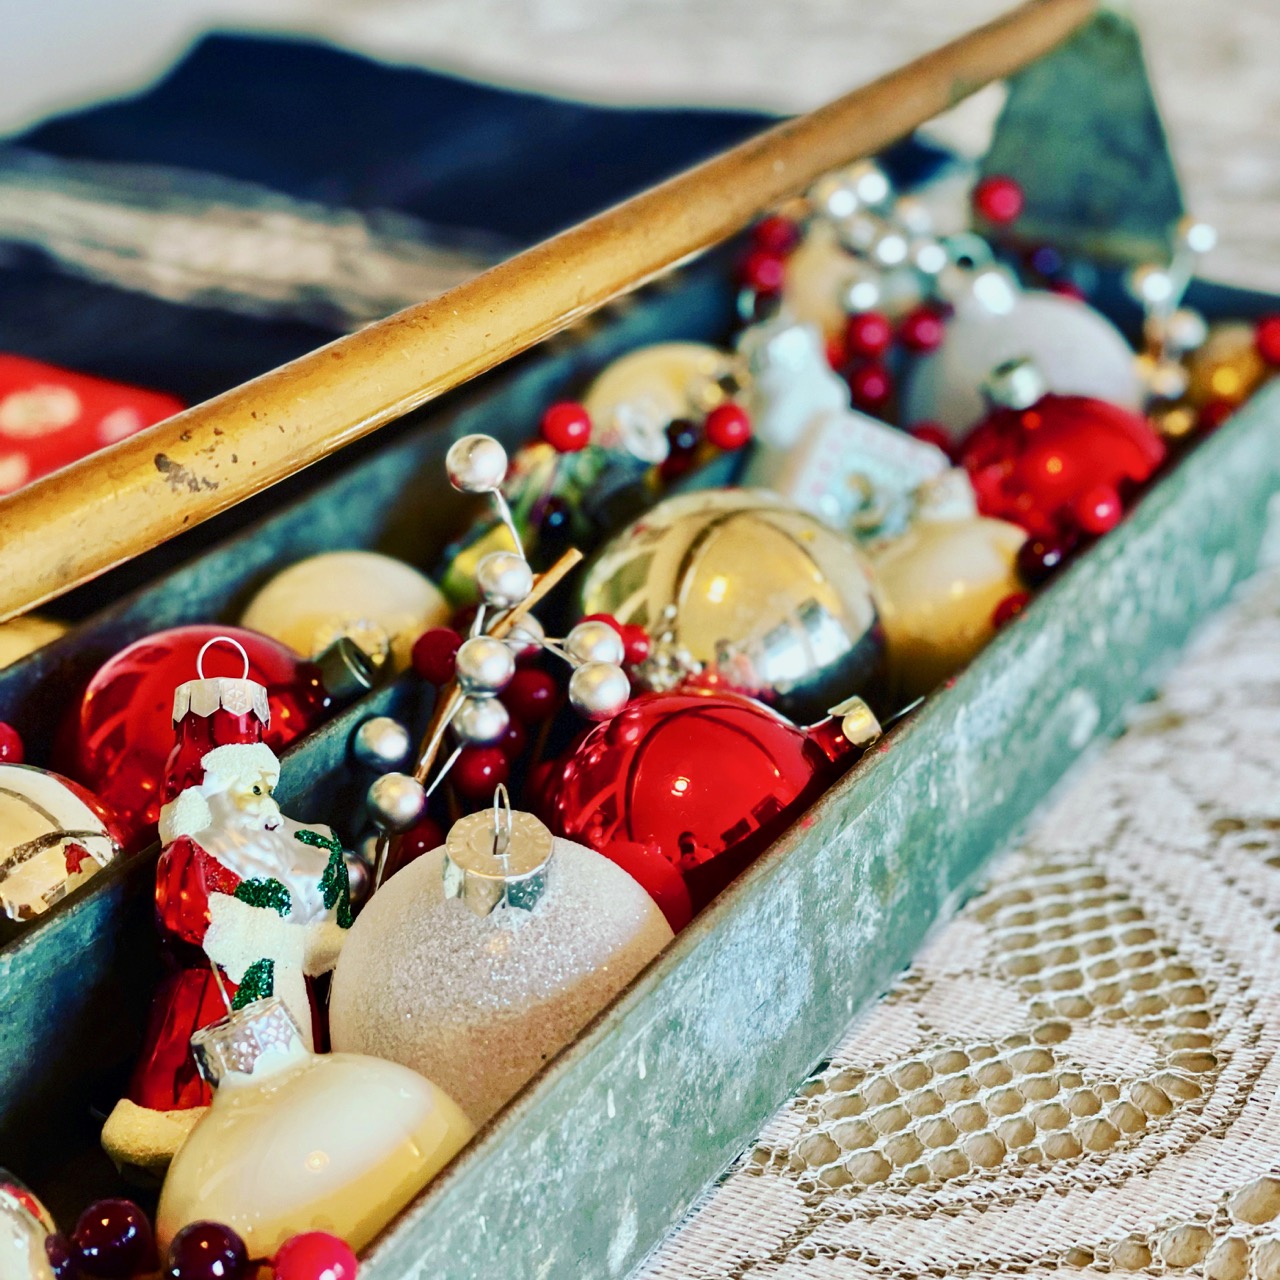 an antique toolbox filled with vintage Christmas ornaments